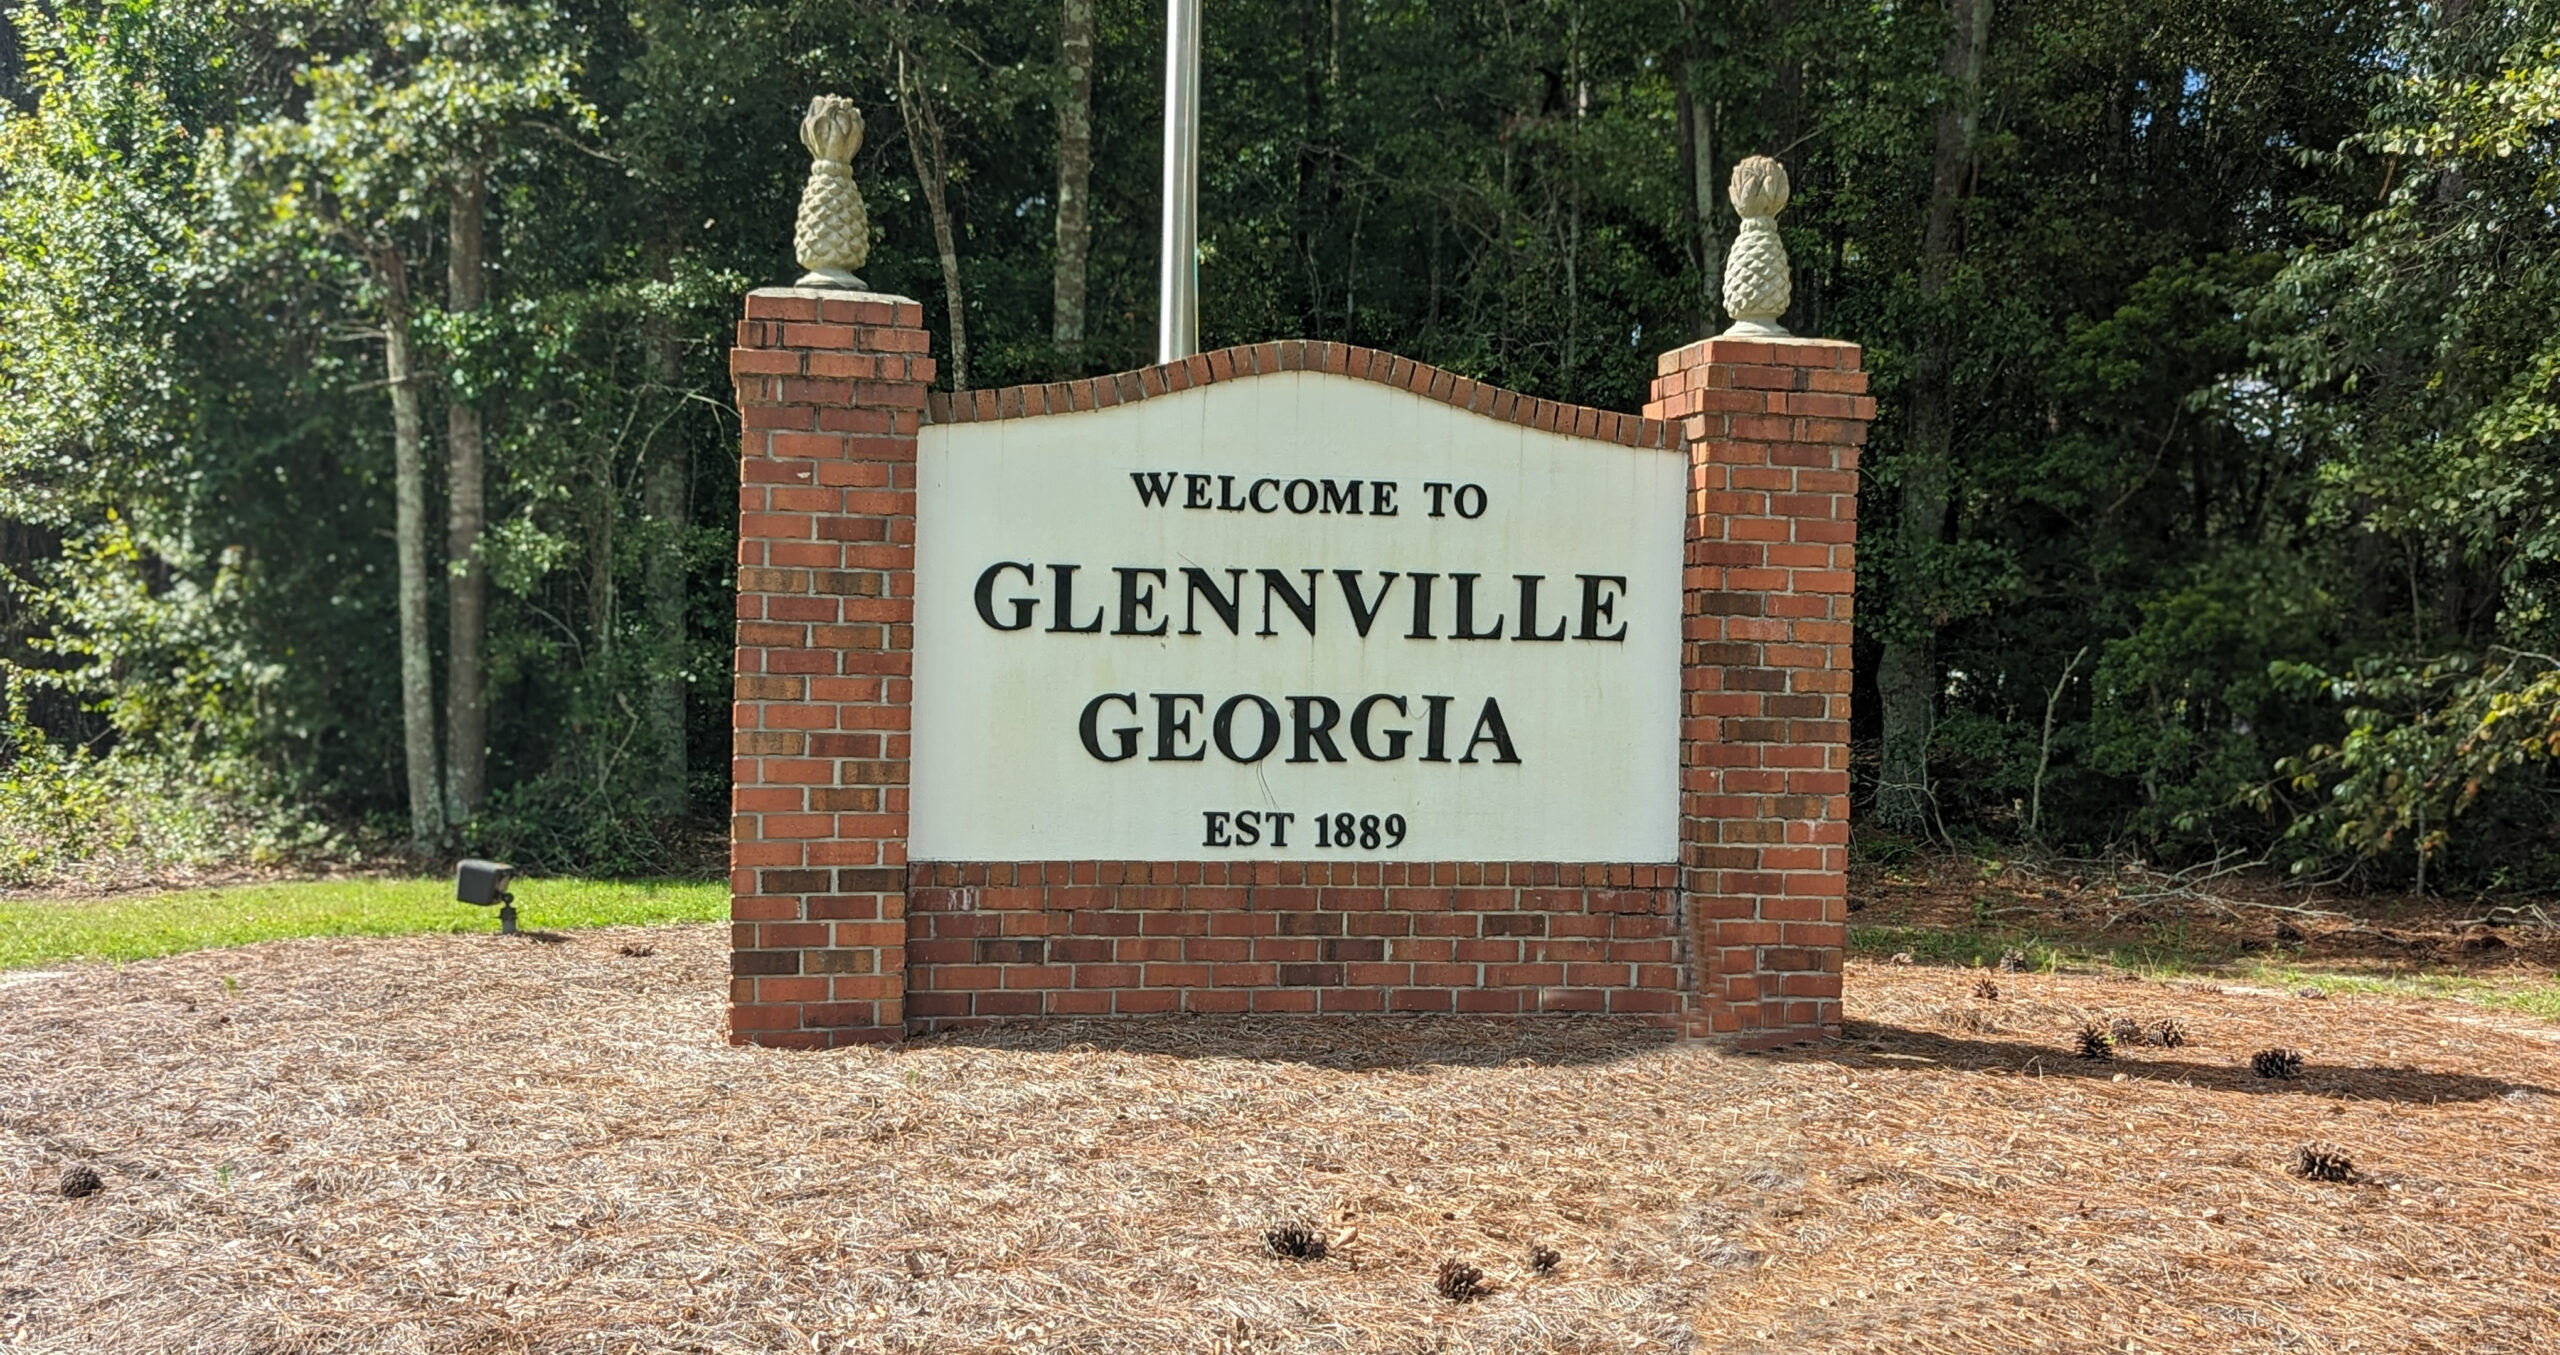 Welcome to Glennville Georgia sign